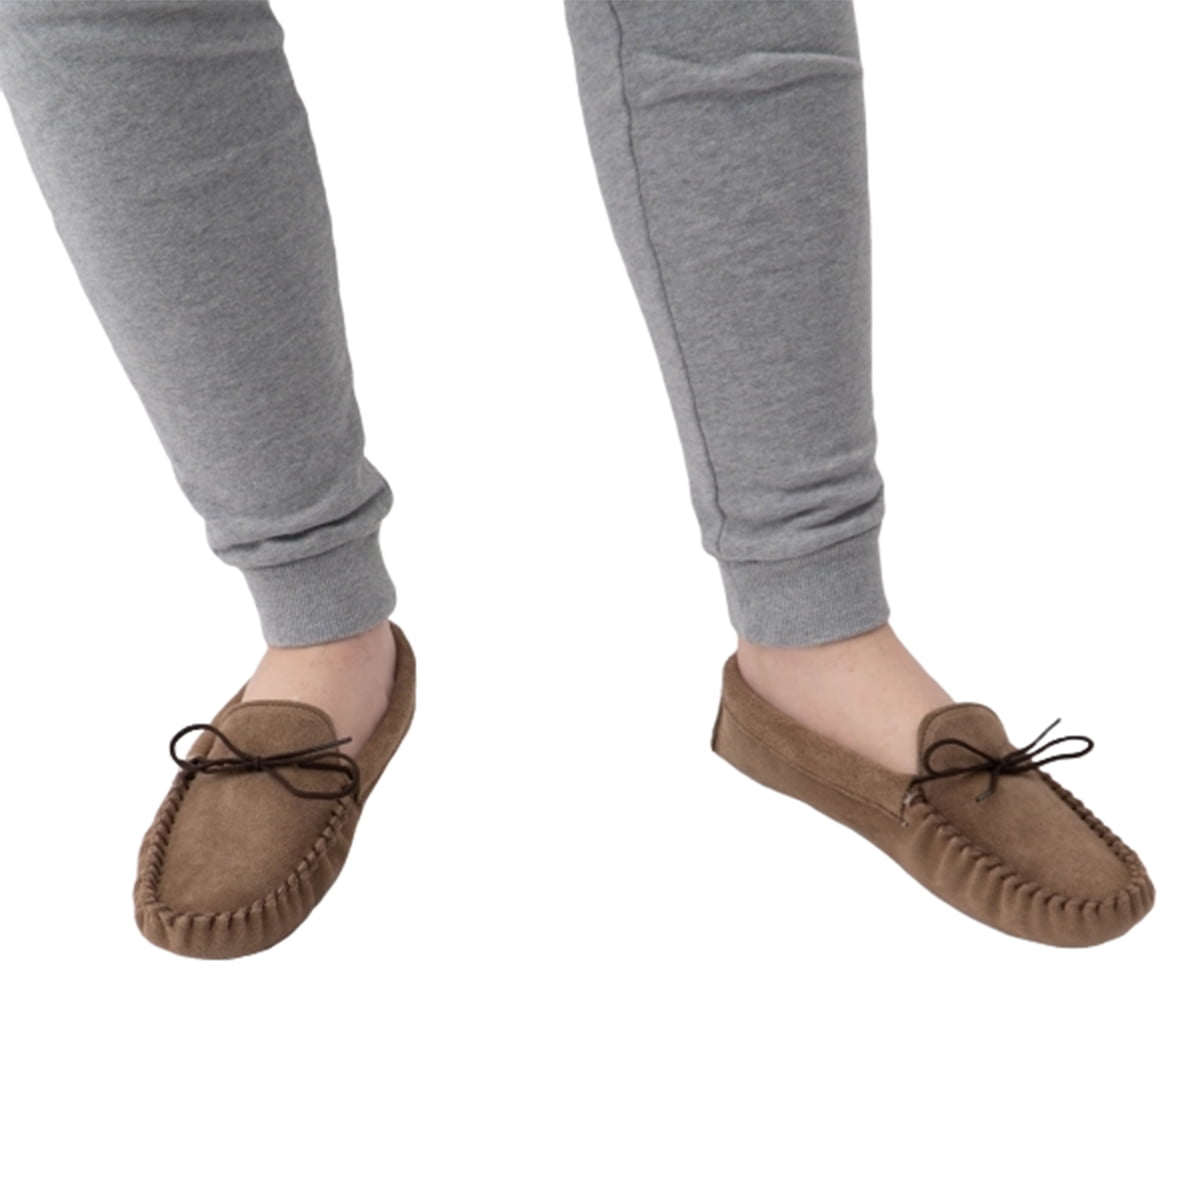 Childrens/Kids Wool Lined Moccasins with Suede Upper and Non-Slip Sole 